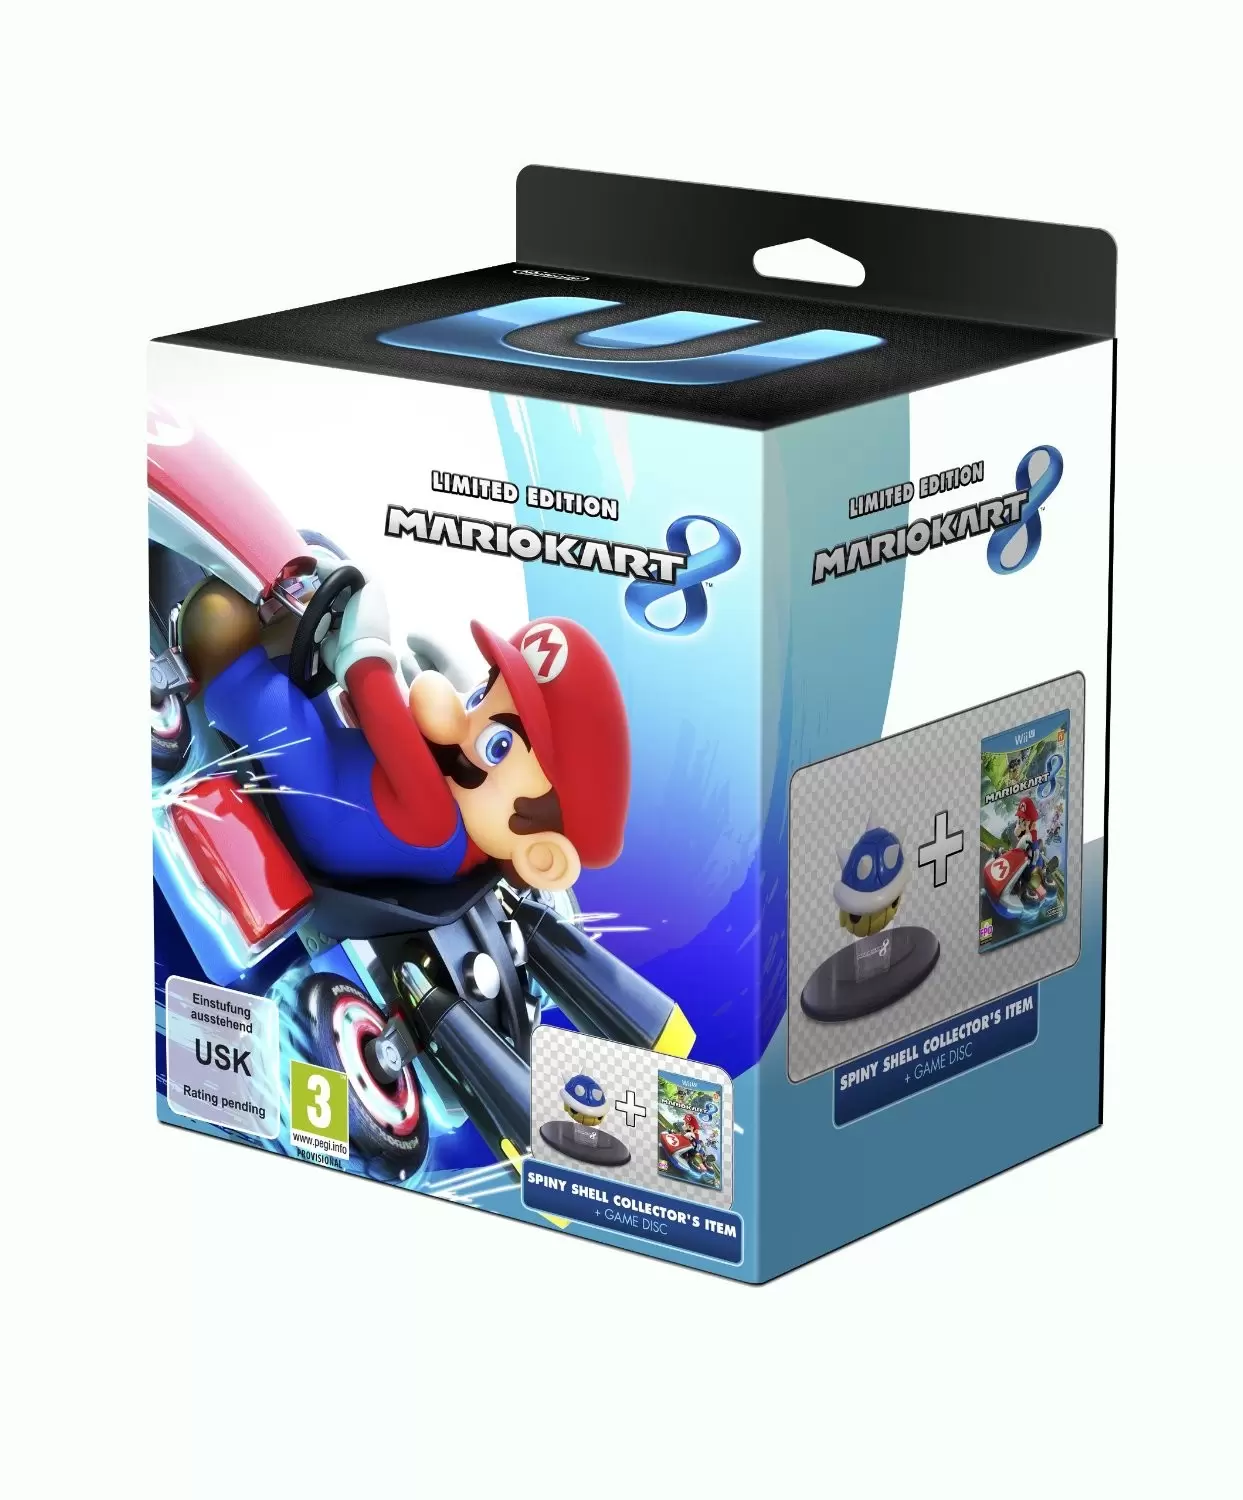 Wii U Games - Mario Kart 8 + Spiny Shell Collector